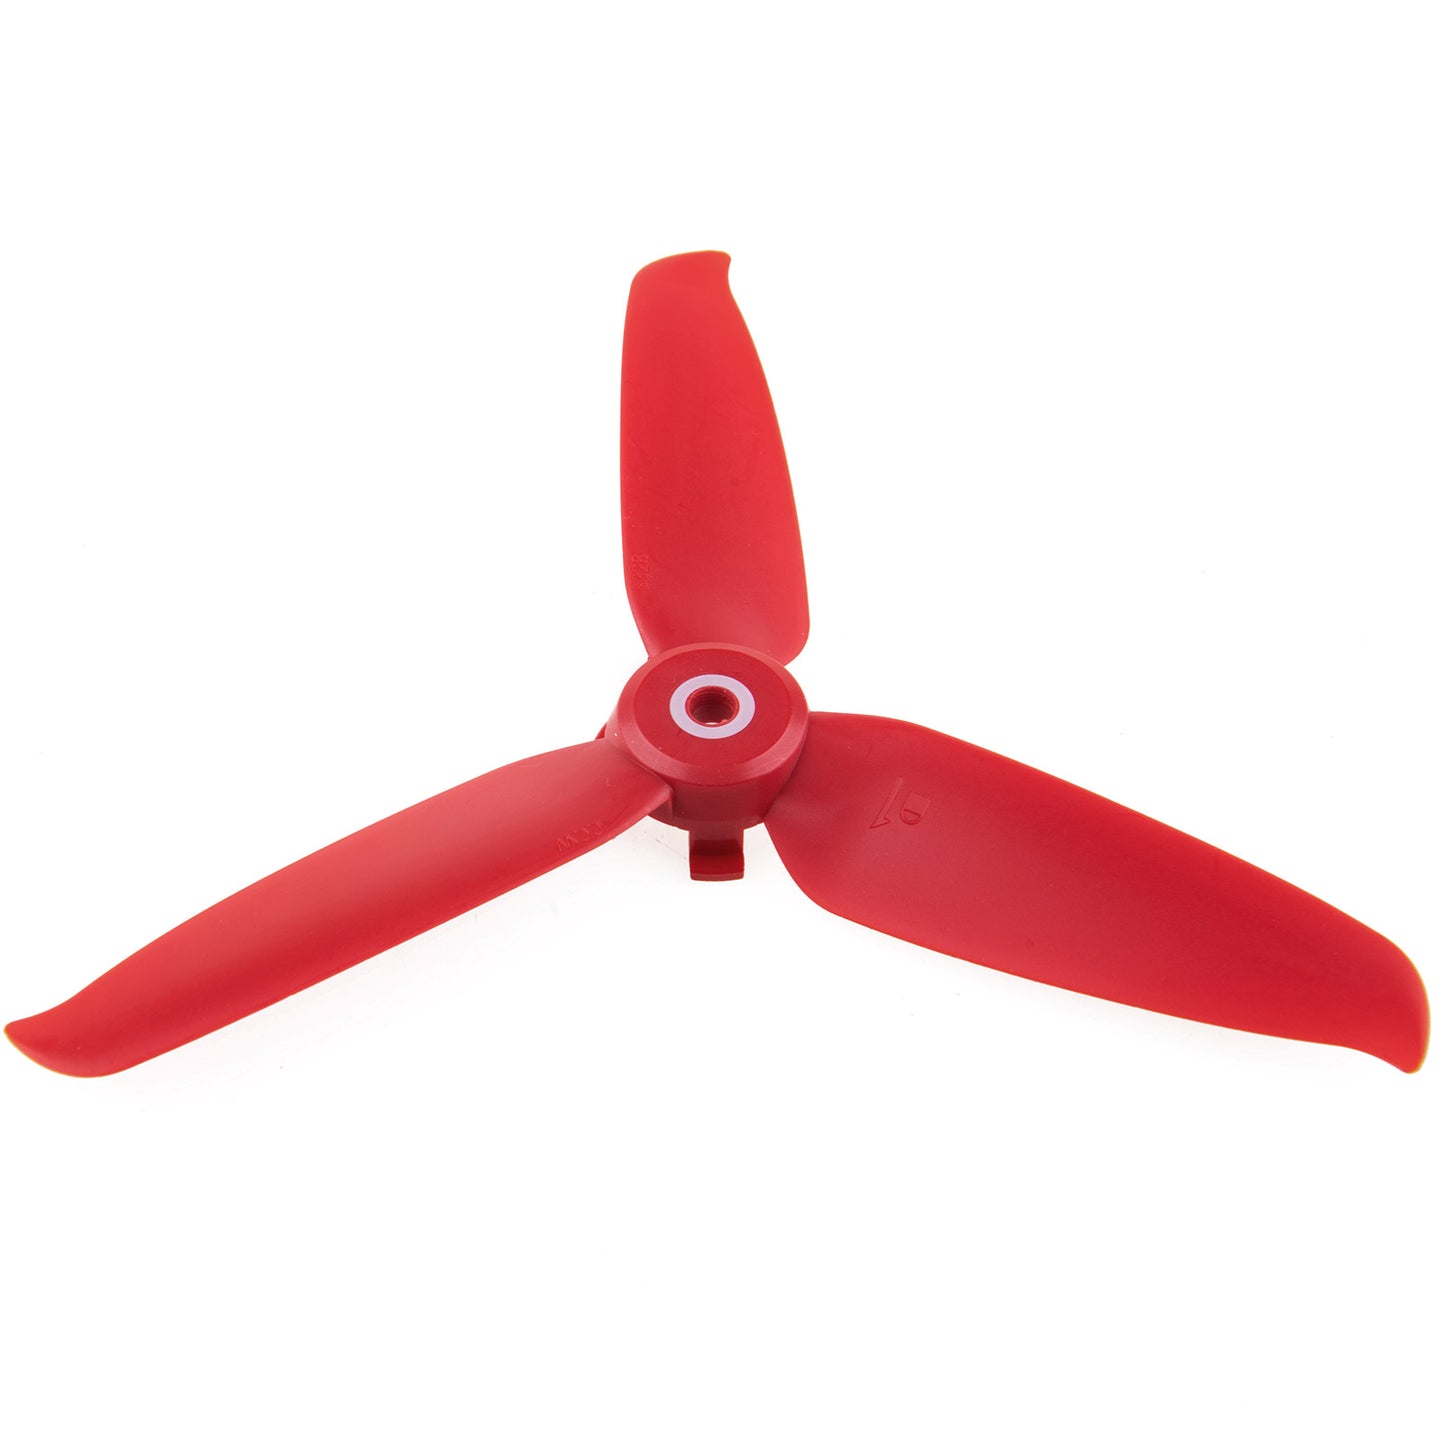 DJI FPV Propellers 5328 Low Noise Quick-Release Props for DJI FPV Drone (Red)